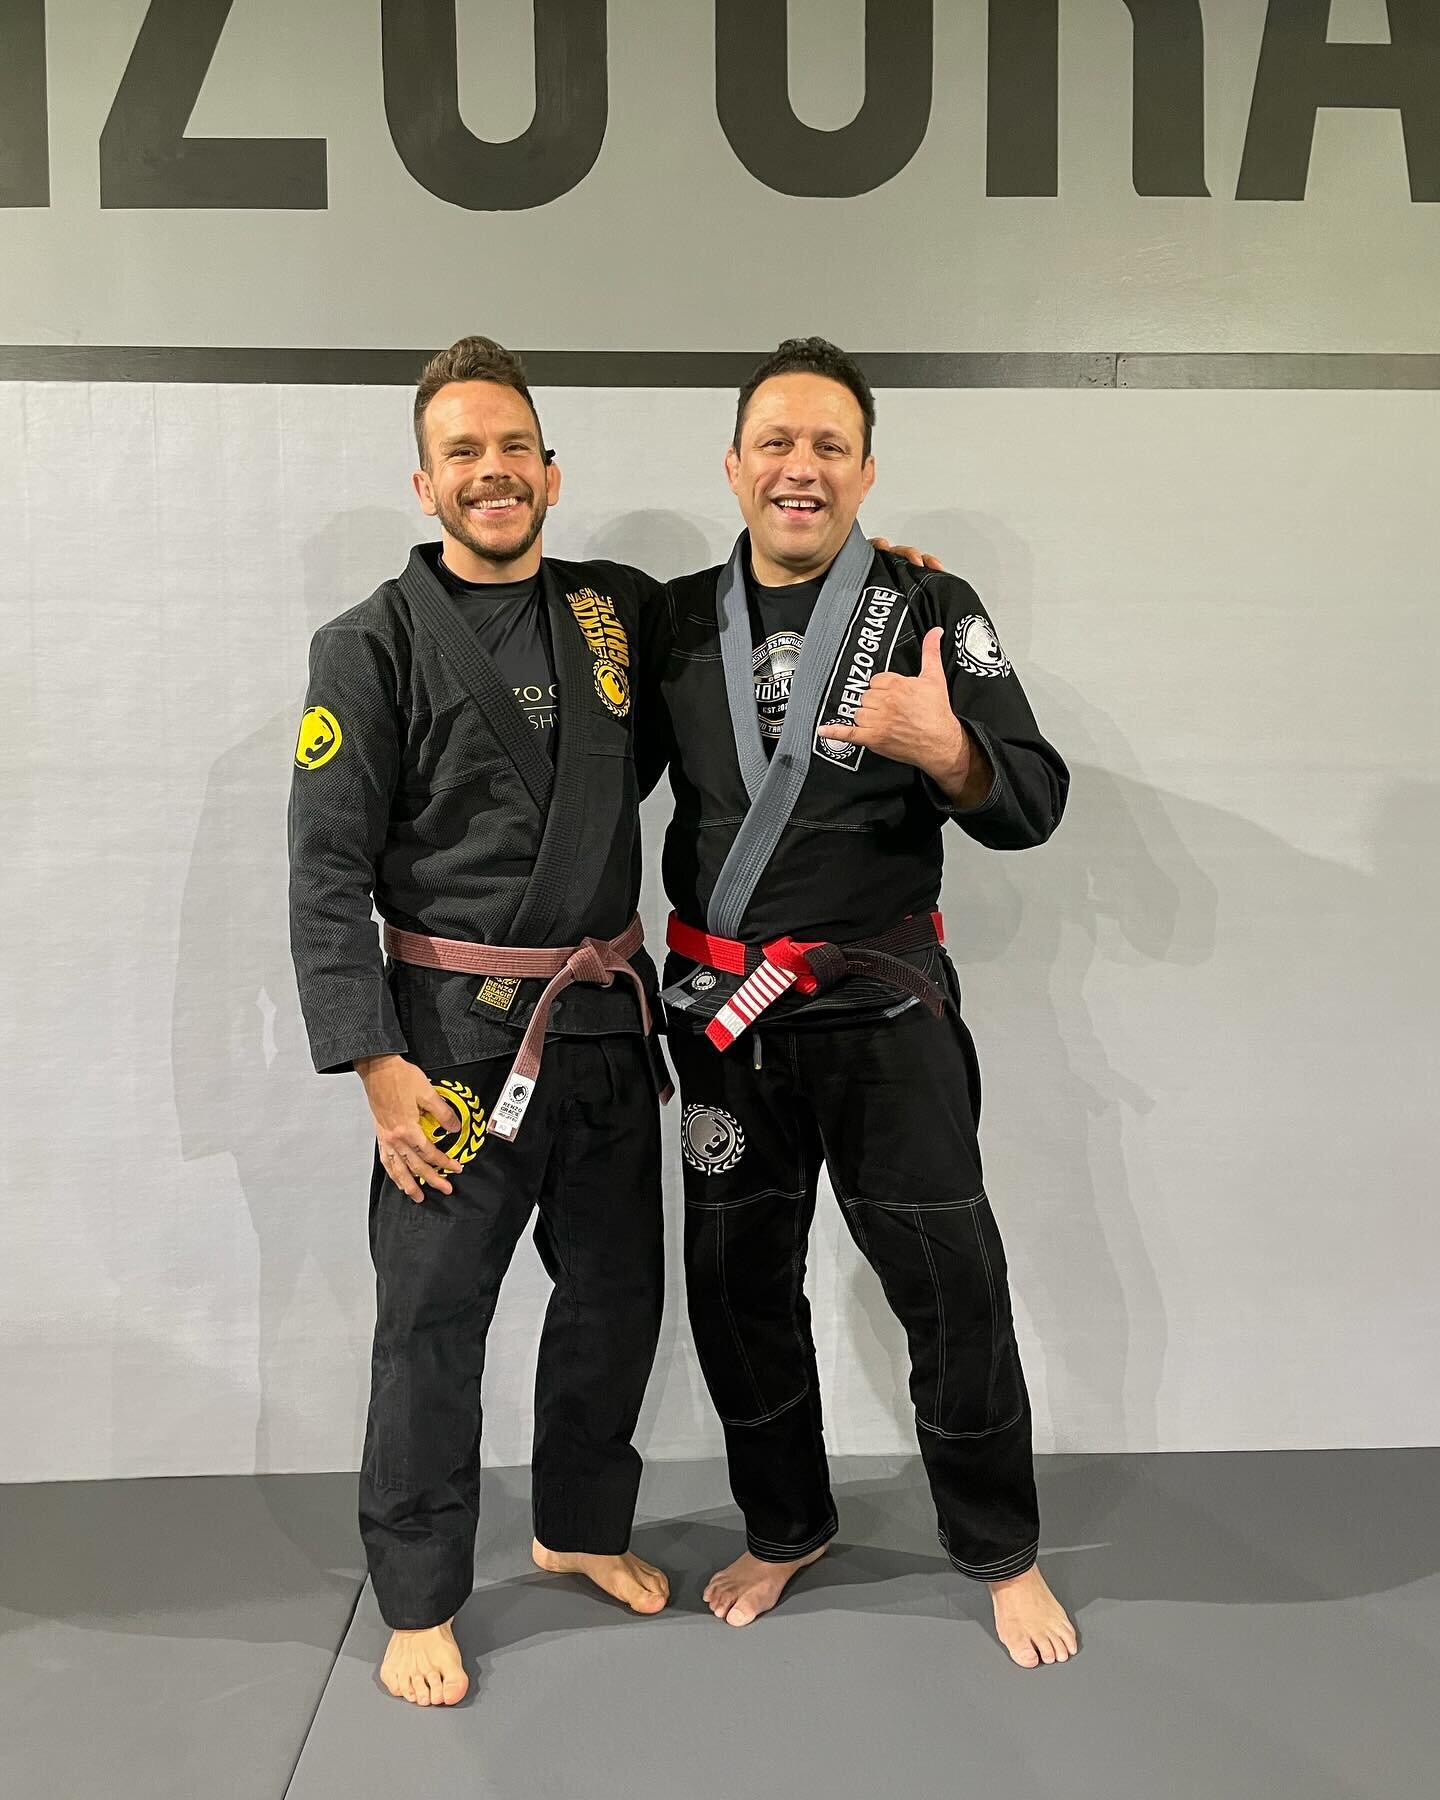 So yesterday I got to learn from and meet Renzo. What a privilege to be part of such an amazing community and gym. @renzogracienashville @shawnwilliamsbjj @renzograciebjj #bjj #bjjnashville #renzograciebjj #renzogracienashville #shawnwilliams #shawnw